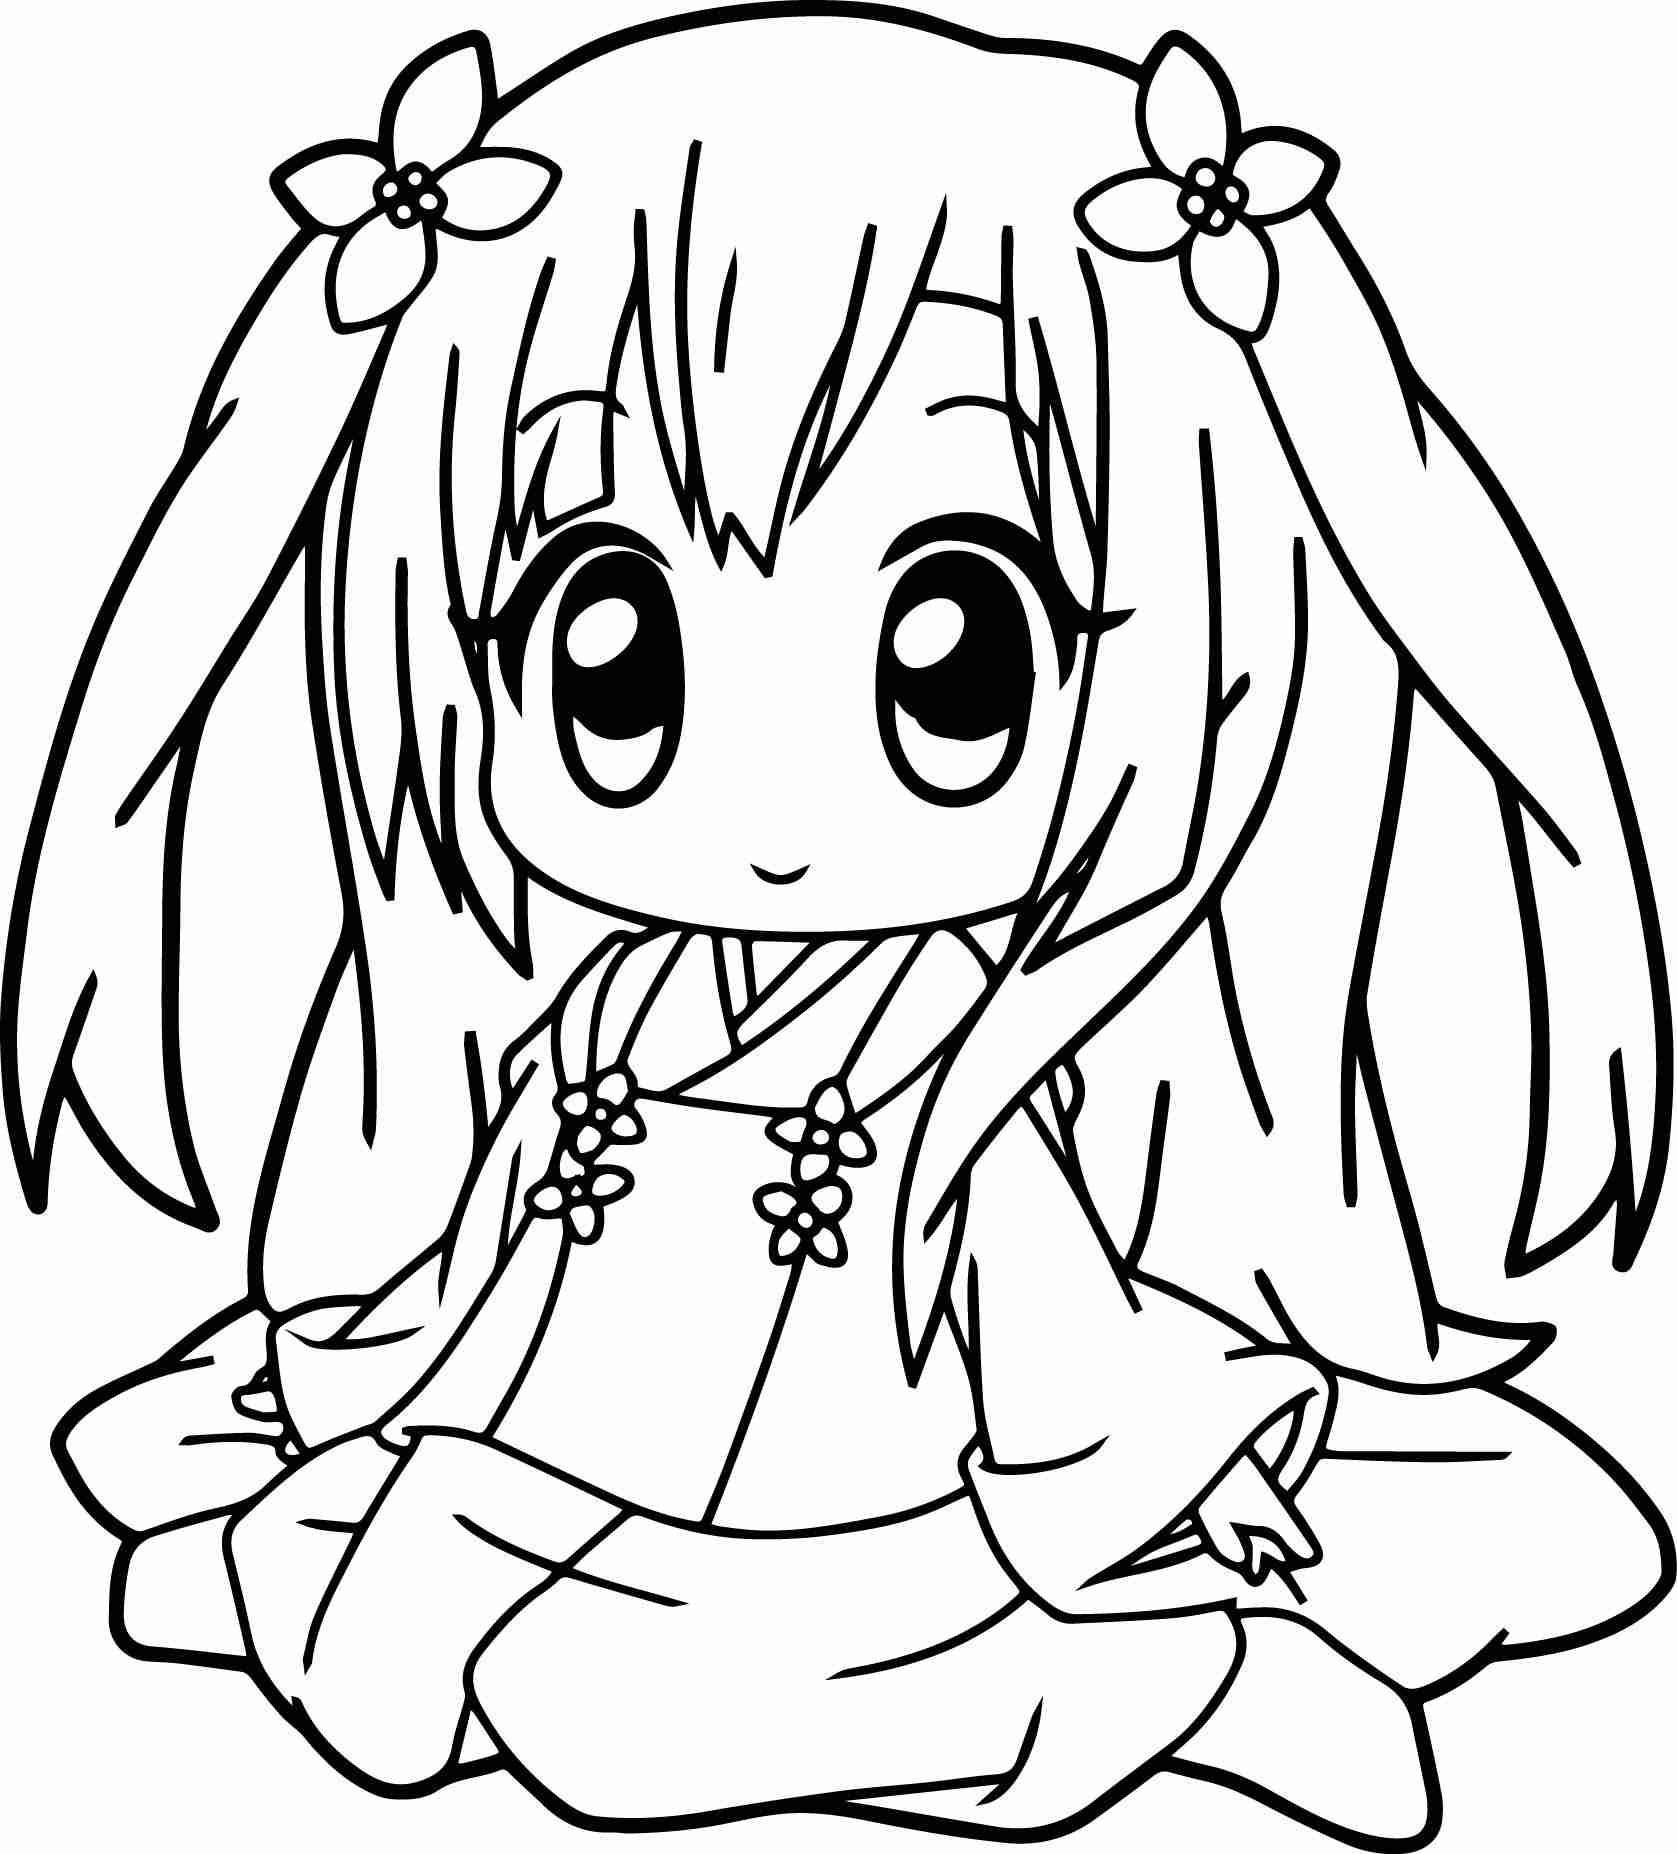 Shugo chara catman anime coloring pages for kids 